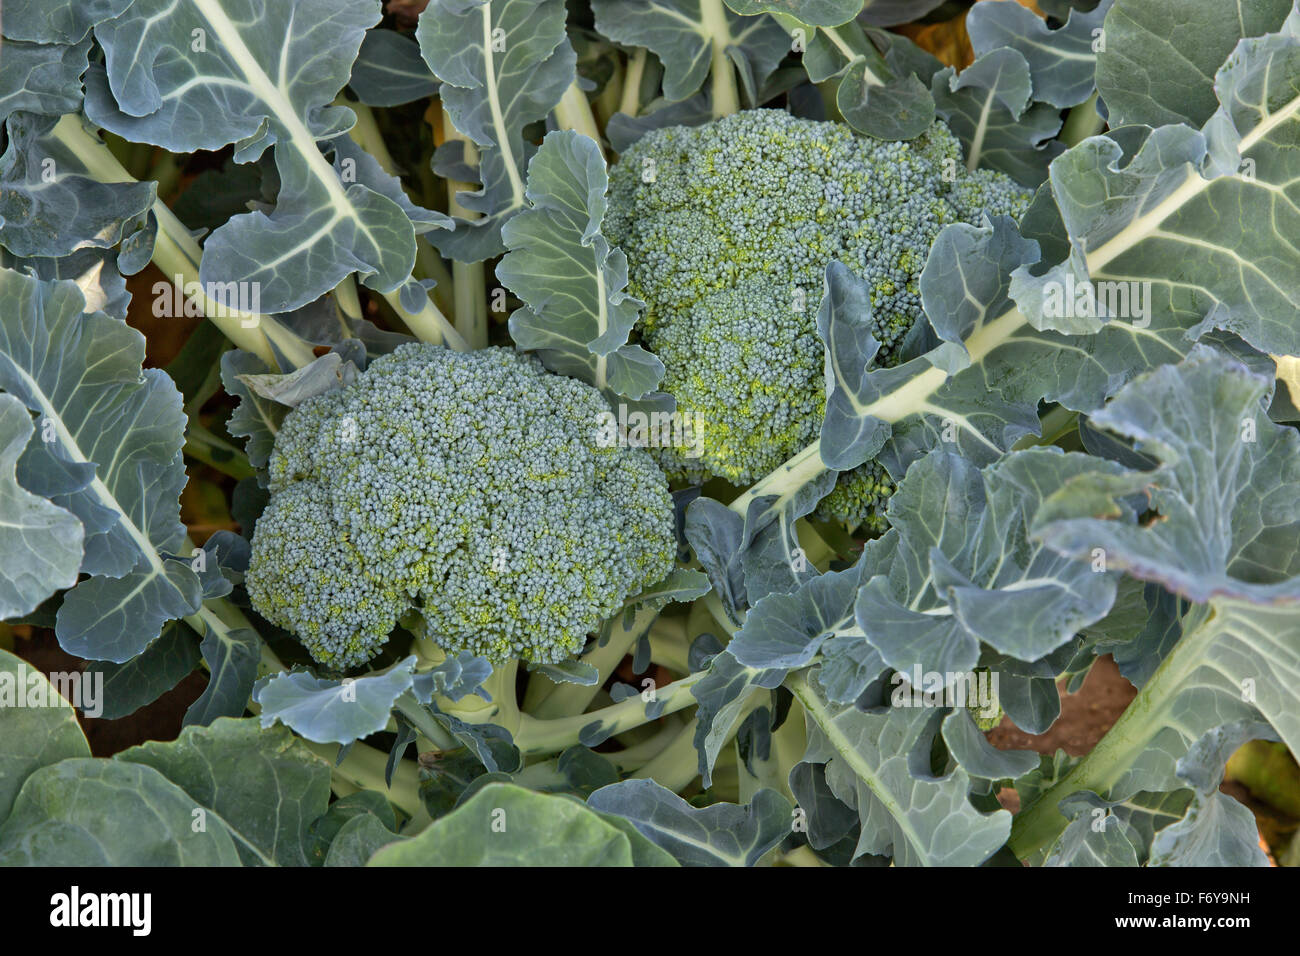 Close-up of broccoli crowns on plant, Brassica oleracea. Stock Photo